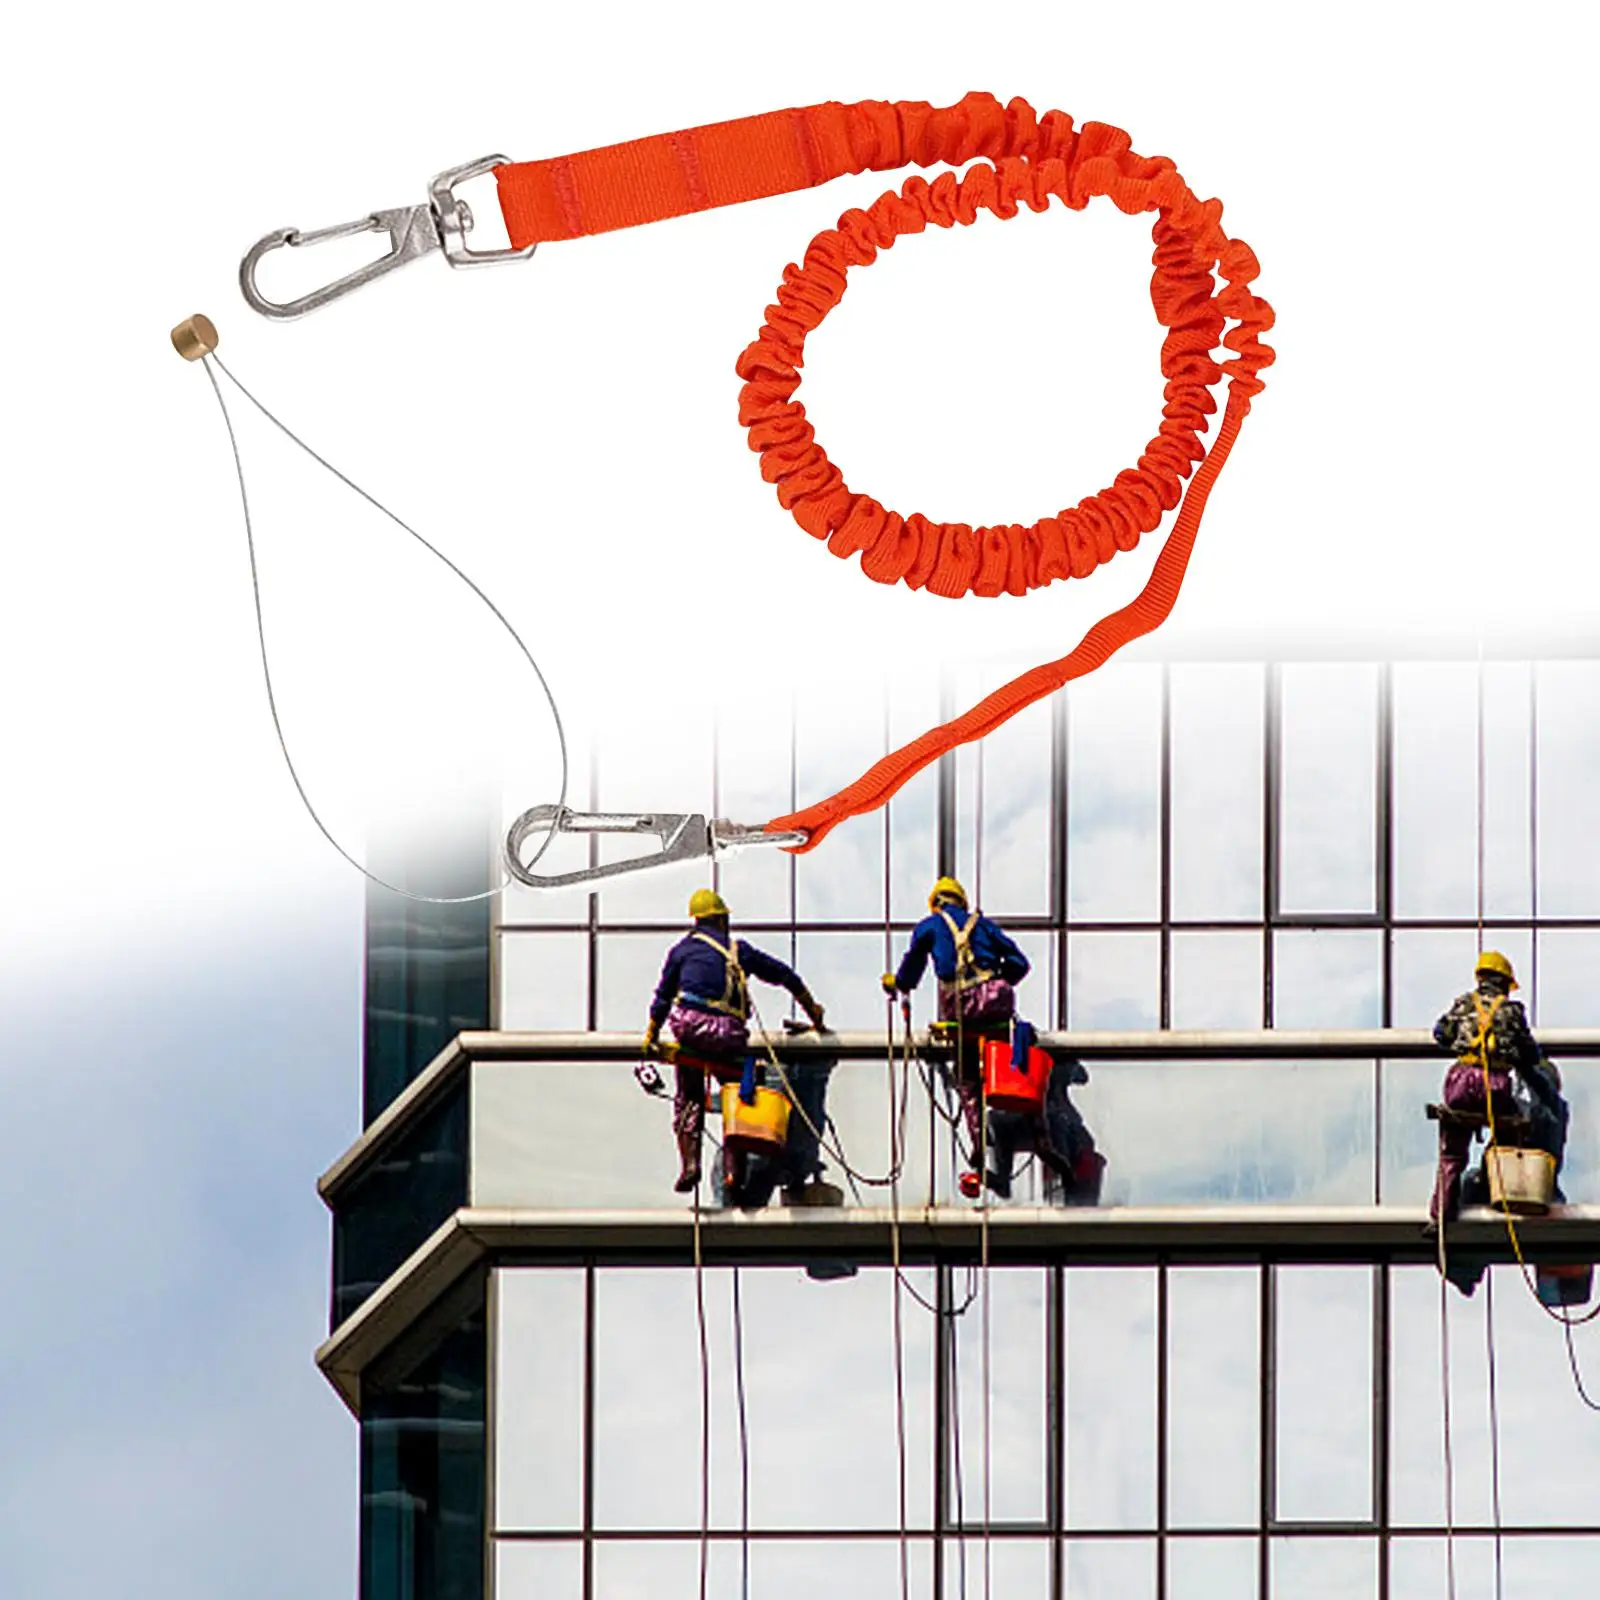 Climbing Restraint Lanyard Fall Protection with Two Buckles Strap Protective Equipment Cord Lanyards for Rappelling Outdoor